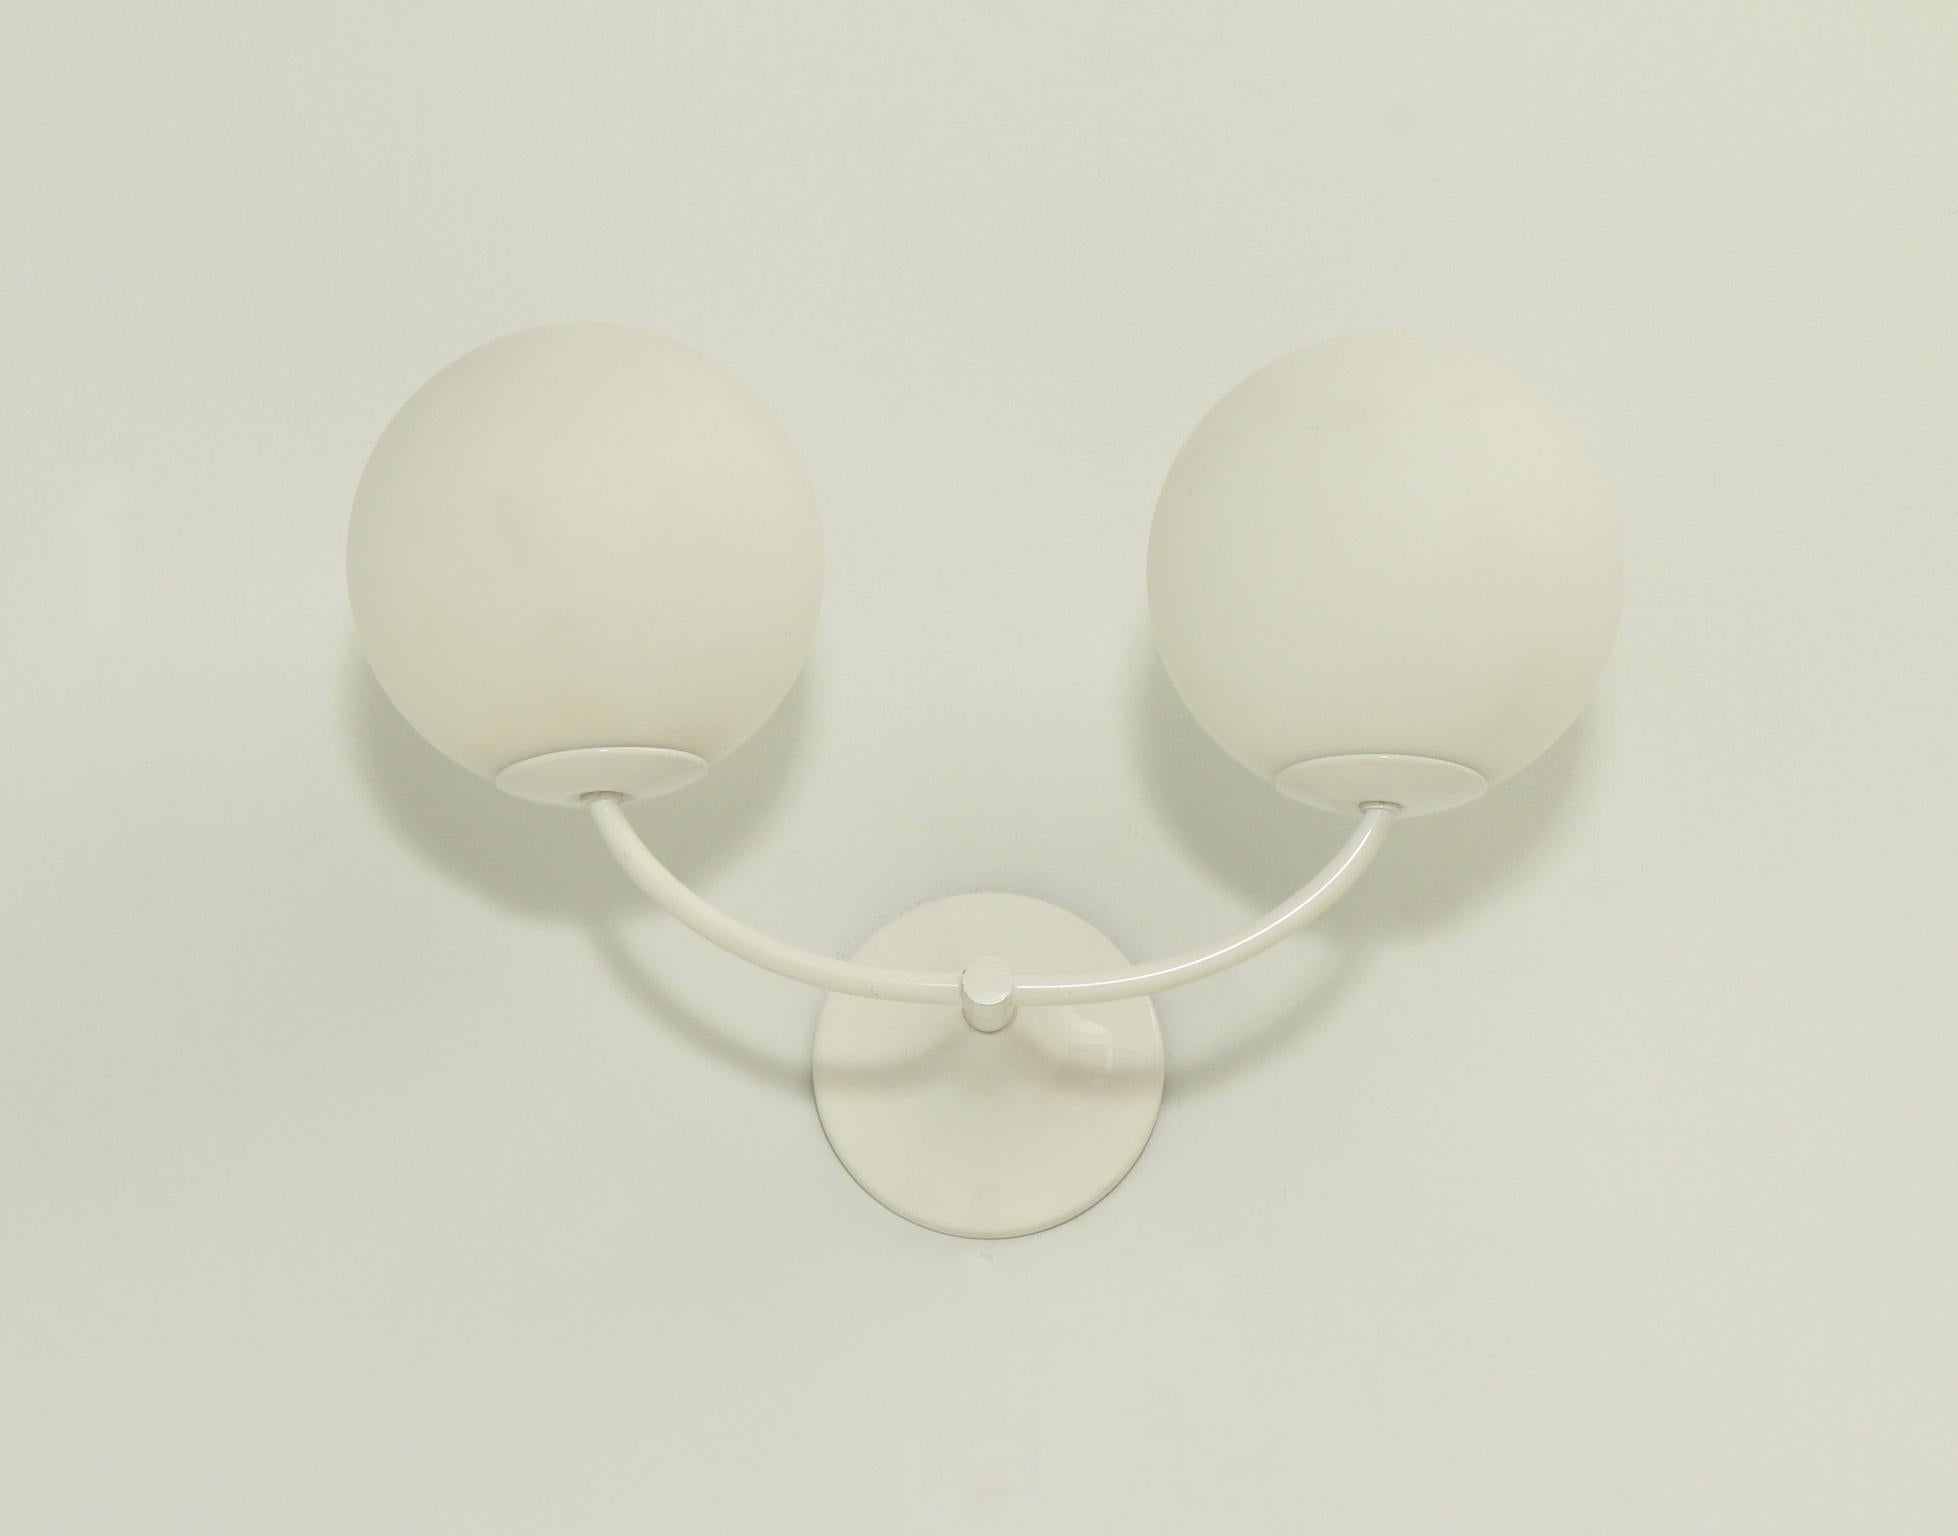 Double sconce designed by E. R. Nele for Temde Leuchten, Switzerland in 1970's. Lacquered metal, wood and white opaline glass globes.